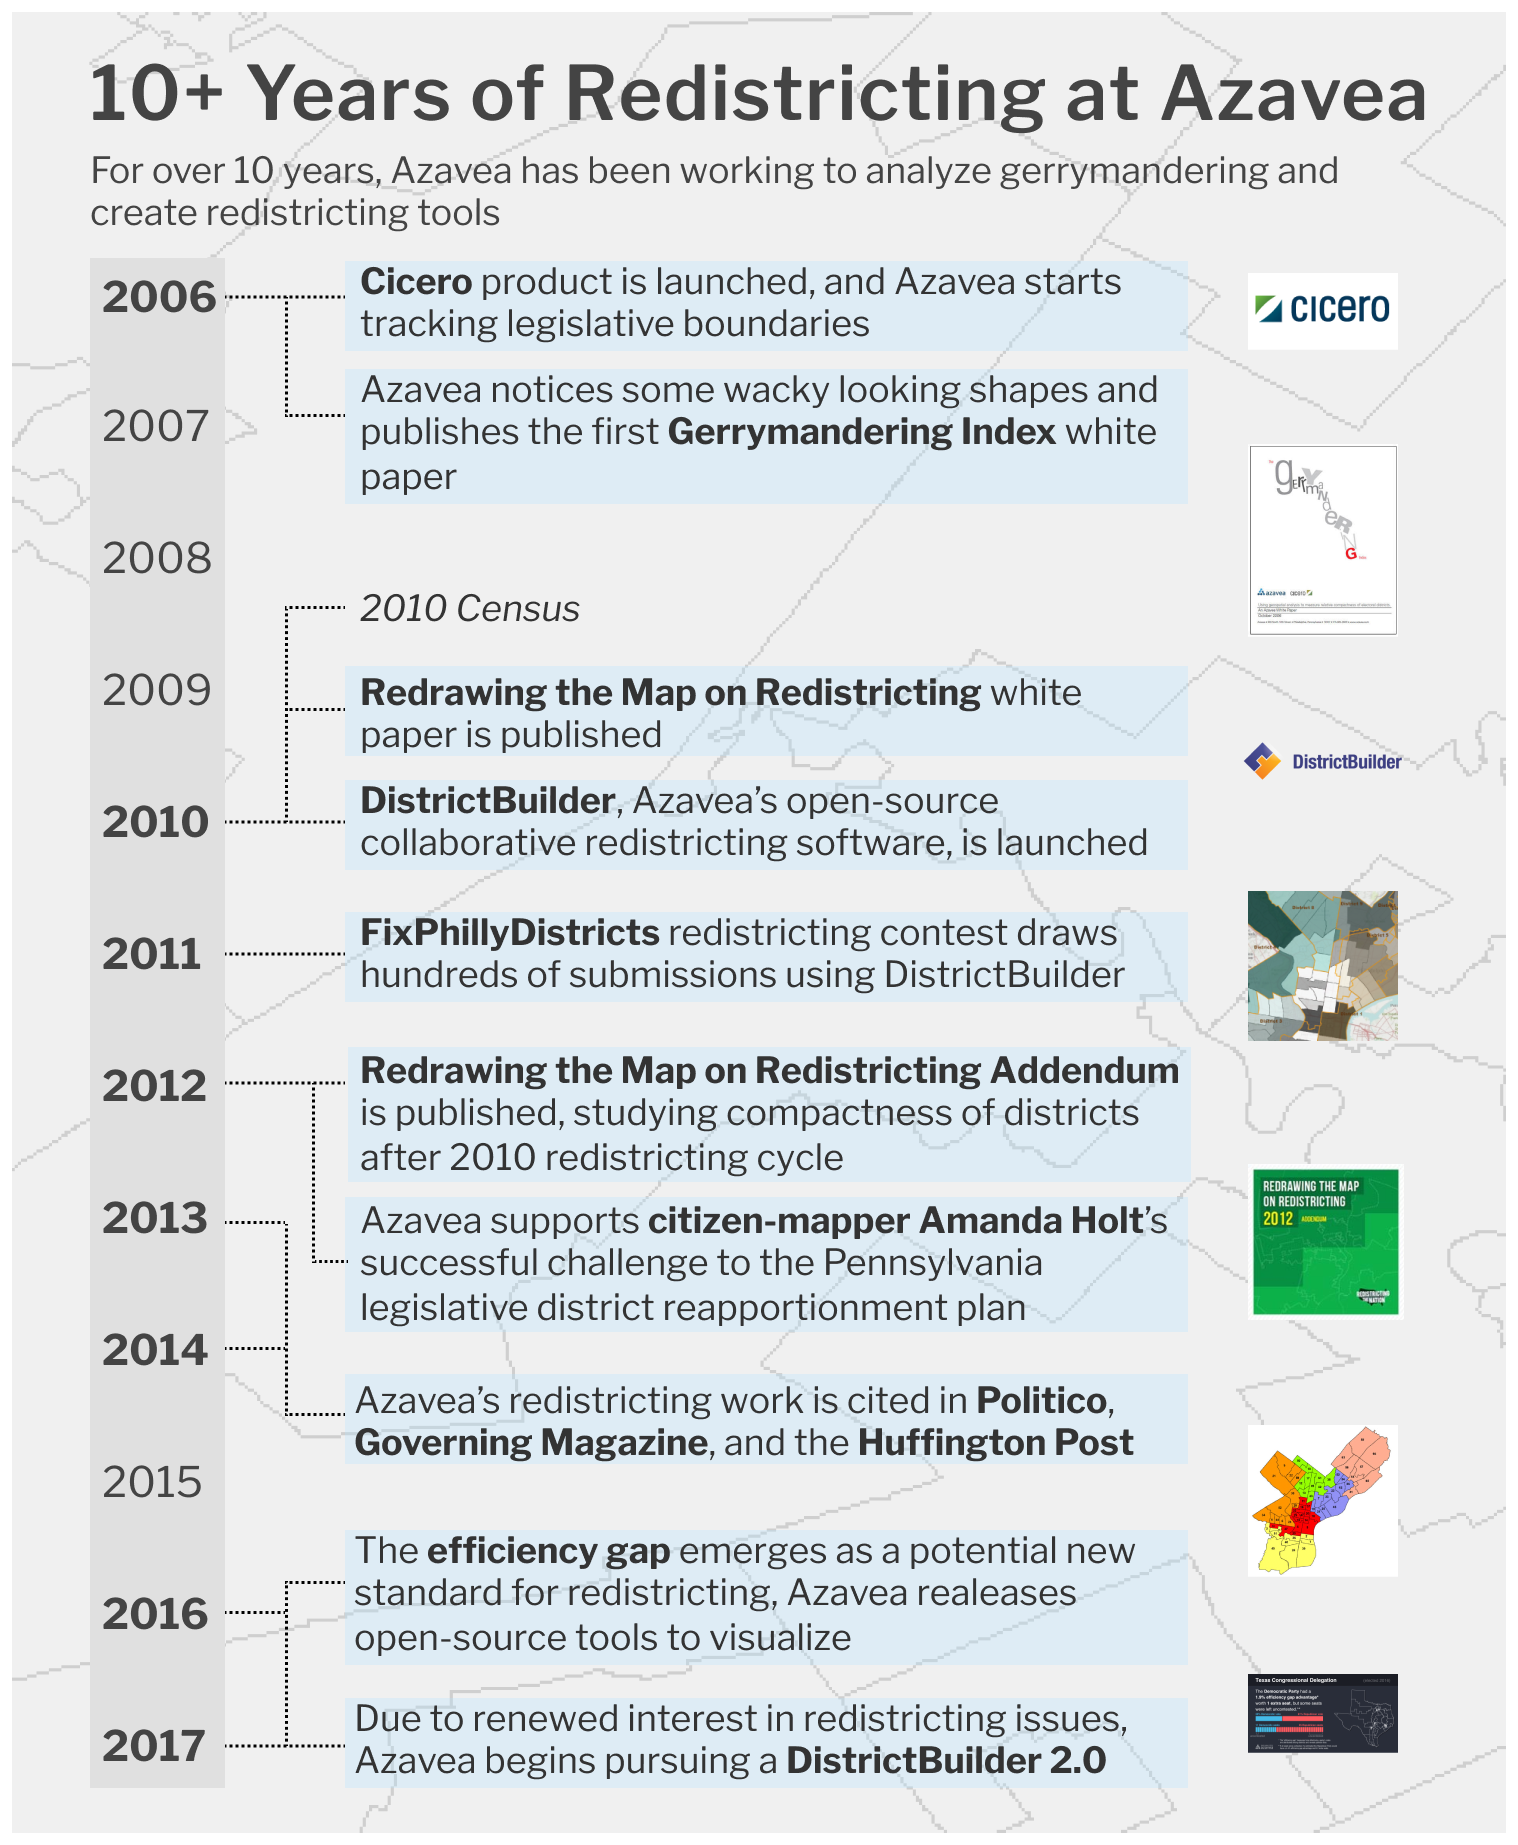 10 years of redistricting at Azavea timeline